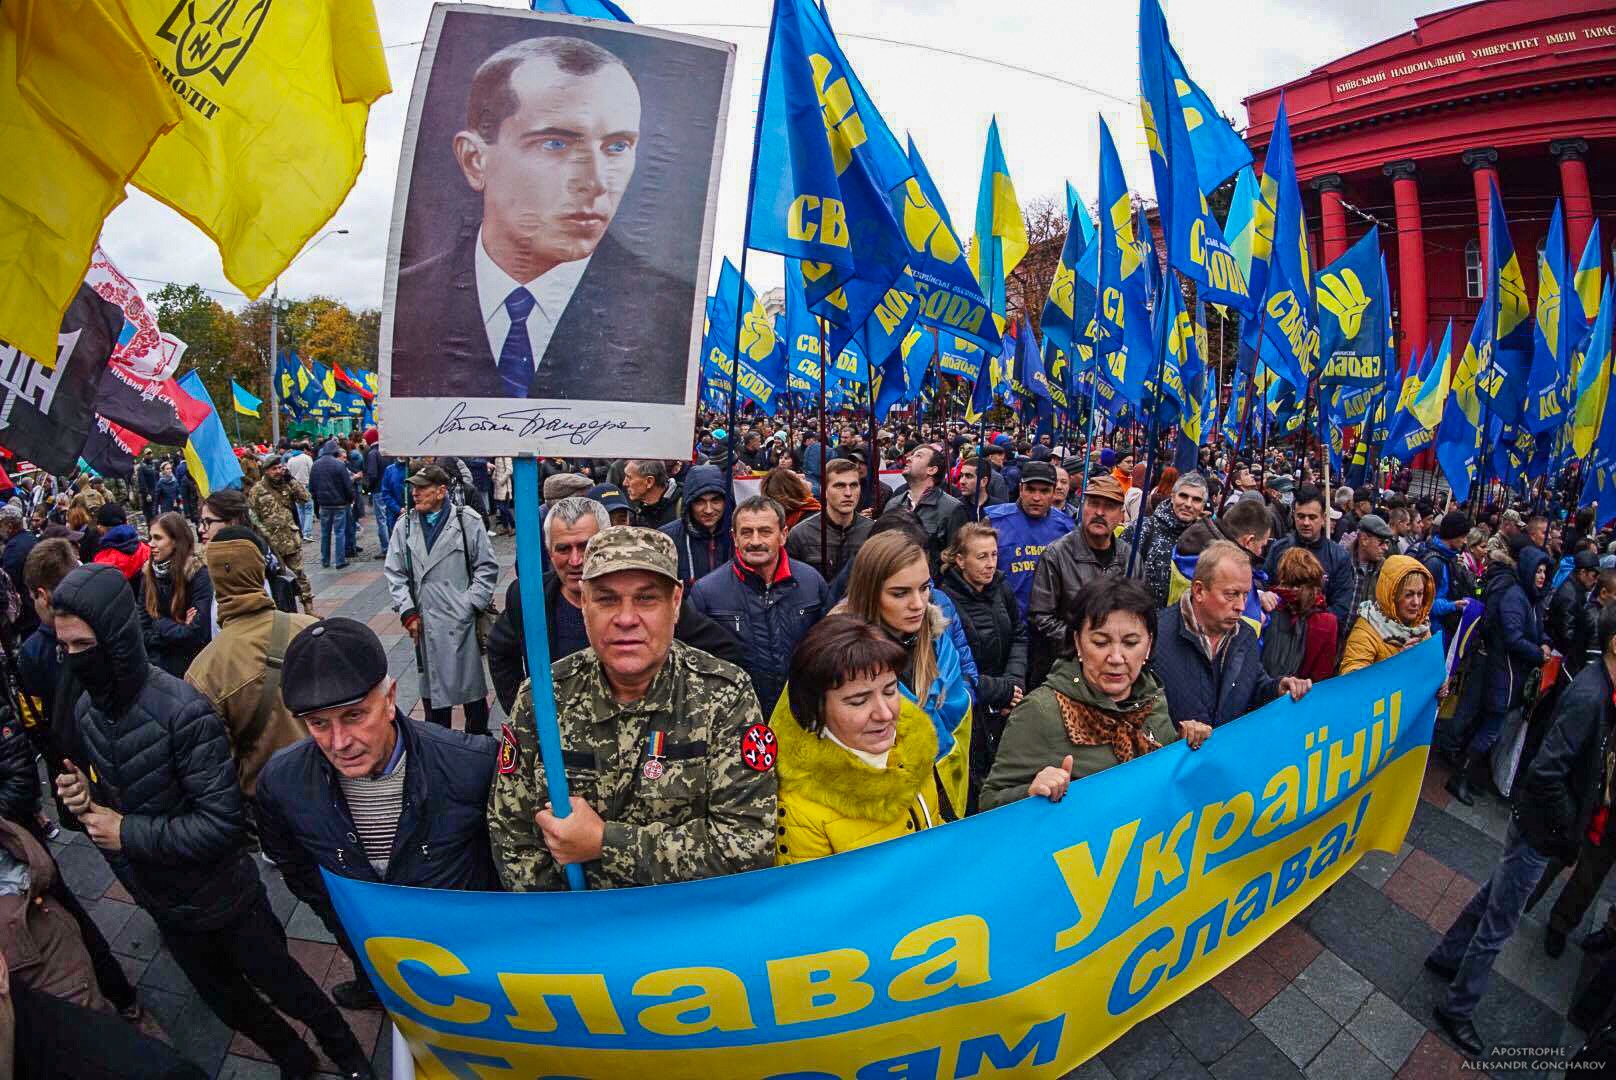 Nationalists march on 75th anniversary of Ukrainian Insurgent Army | Photos ~~